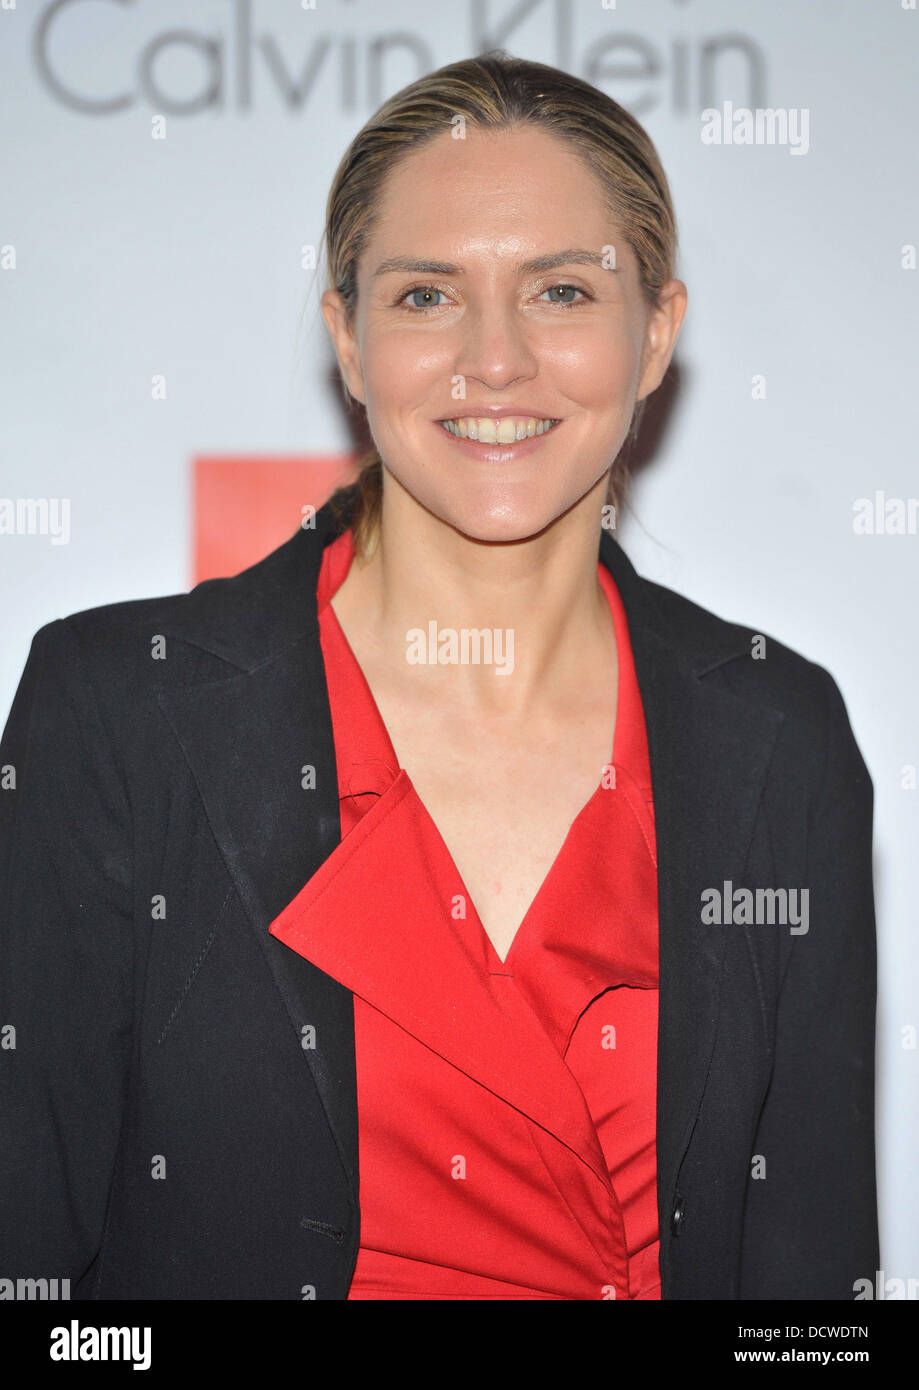 Louise Mensch Red's Hot Women Awards in association with euphoria Calvin  Klein held at the St. Pancras Renaissance Hotel - Arrivals. London, England  - 23.11.11 Stock Photo - Alamy